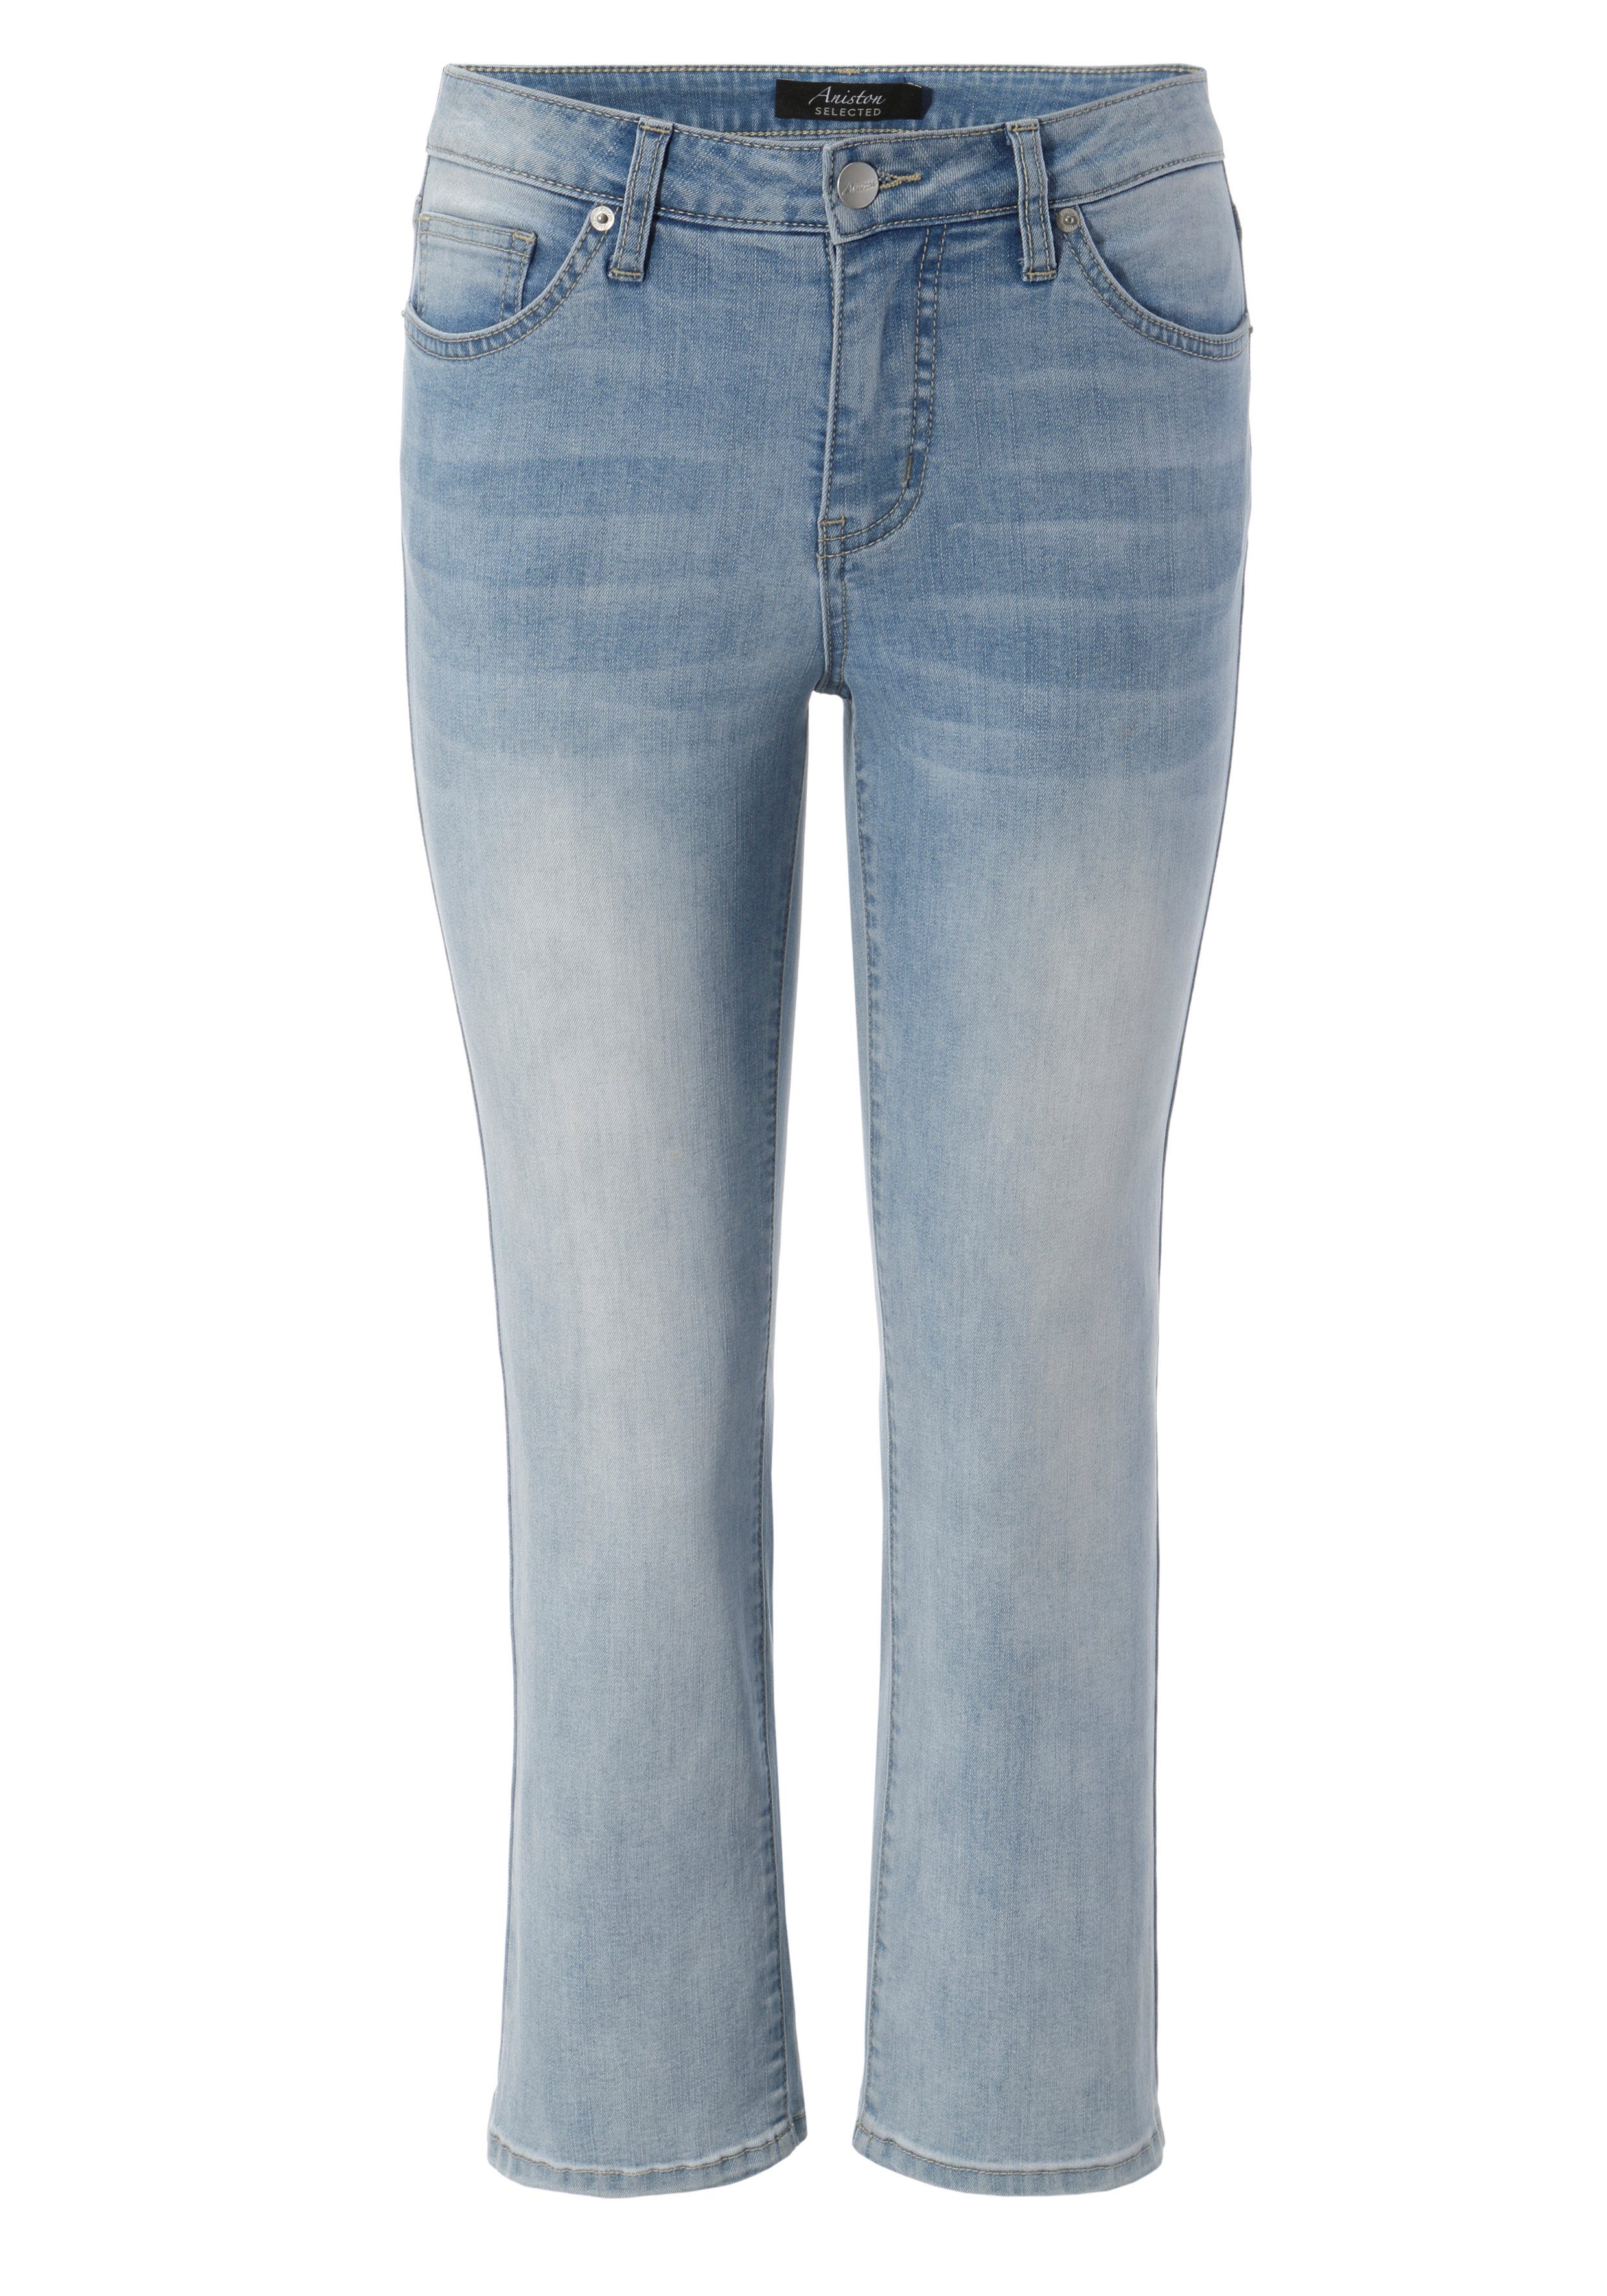 Aniston SELECTED Straight-Jeans in cropped Länge verkürzter light-blue-washed